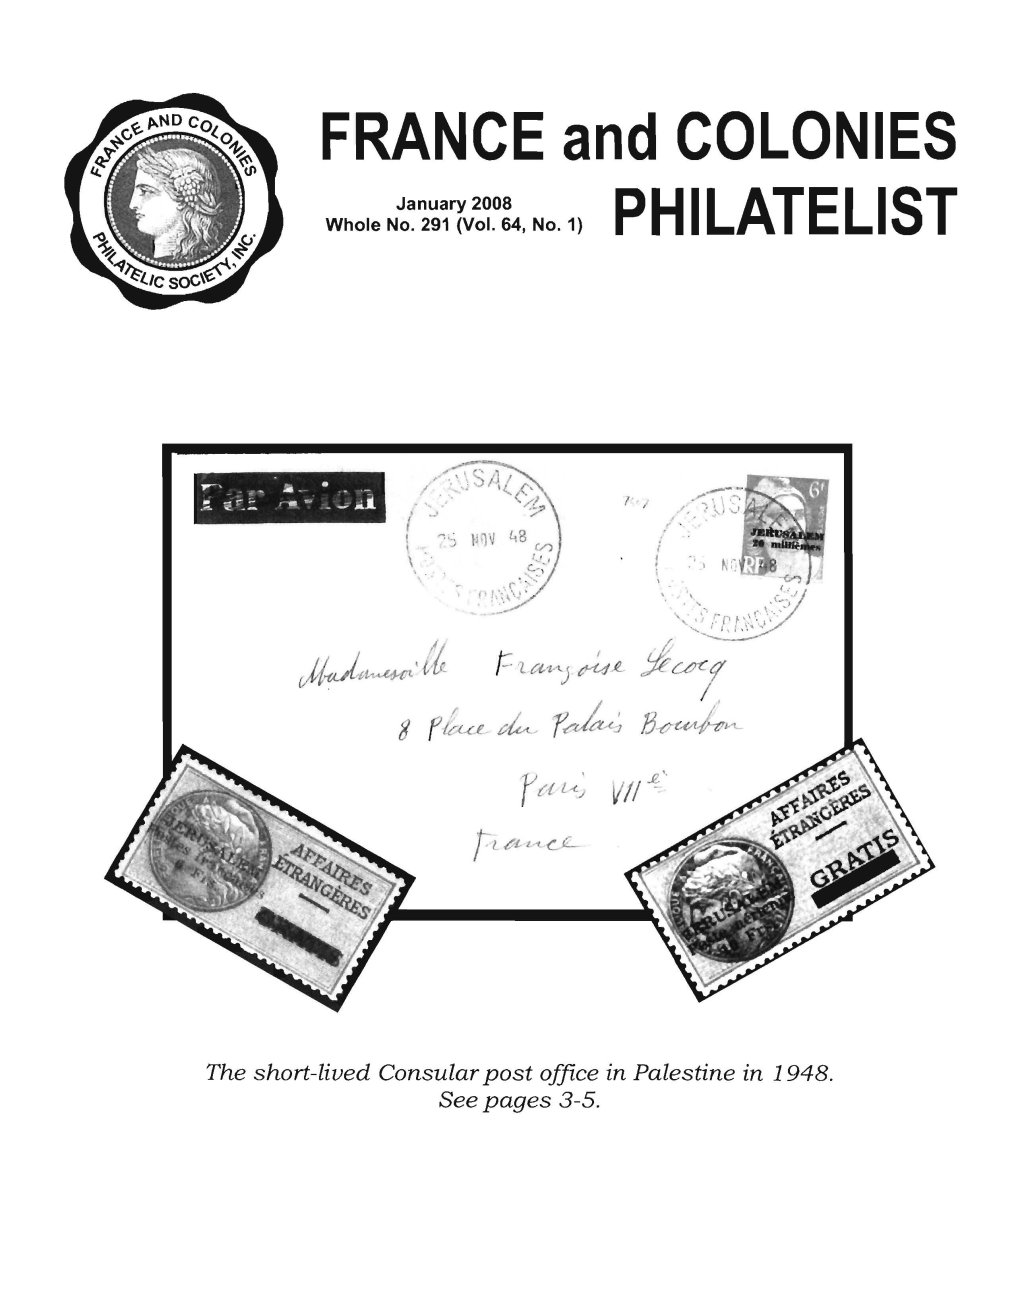 FRANCE and COLONIES PHILATEL1ST